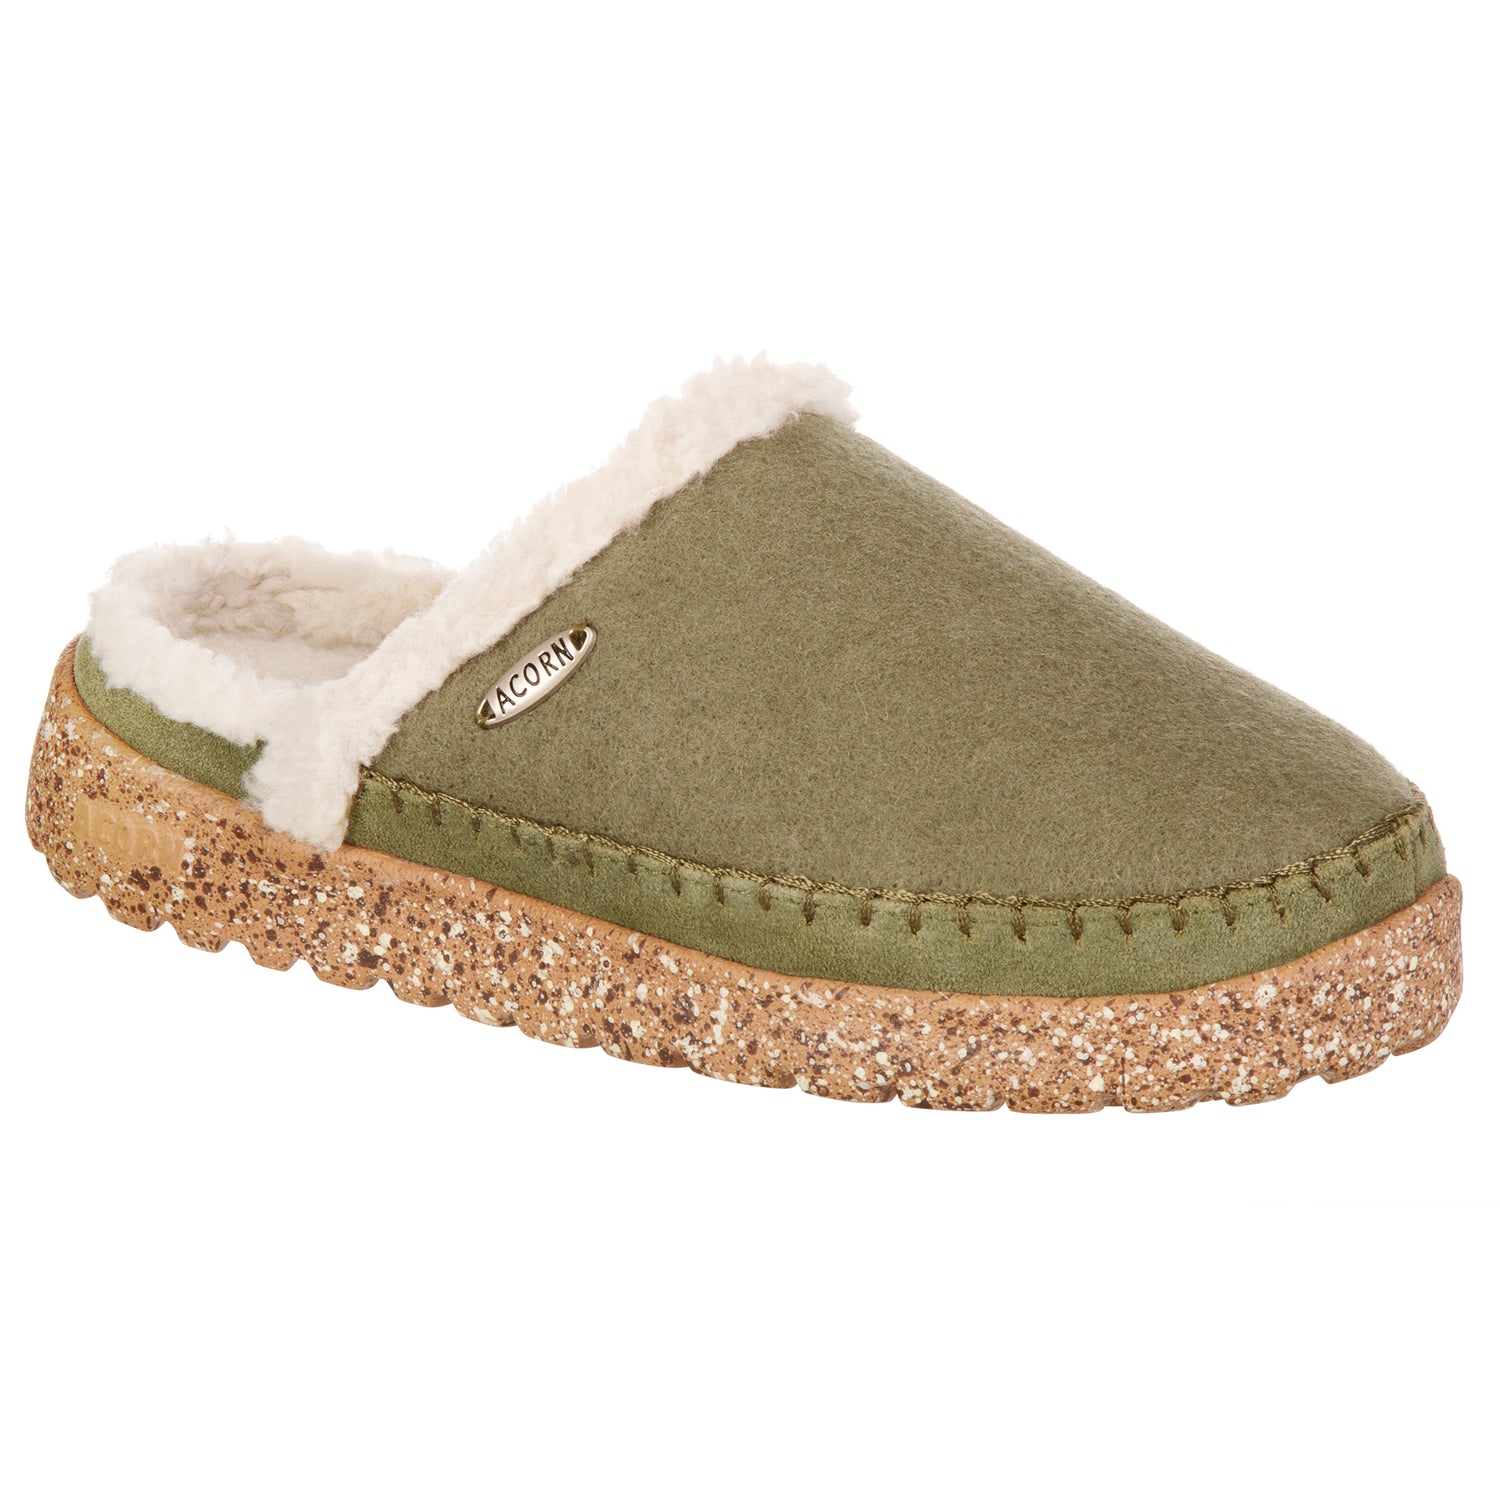 Women’s Acorn Recycled Rockland Clog - olive side view